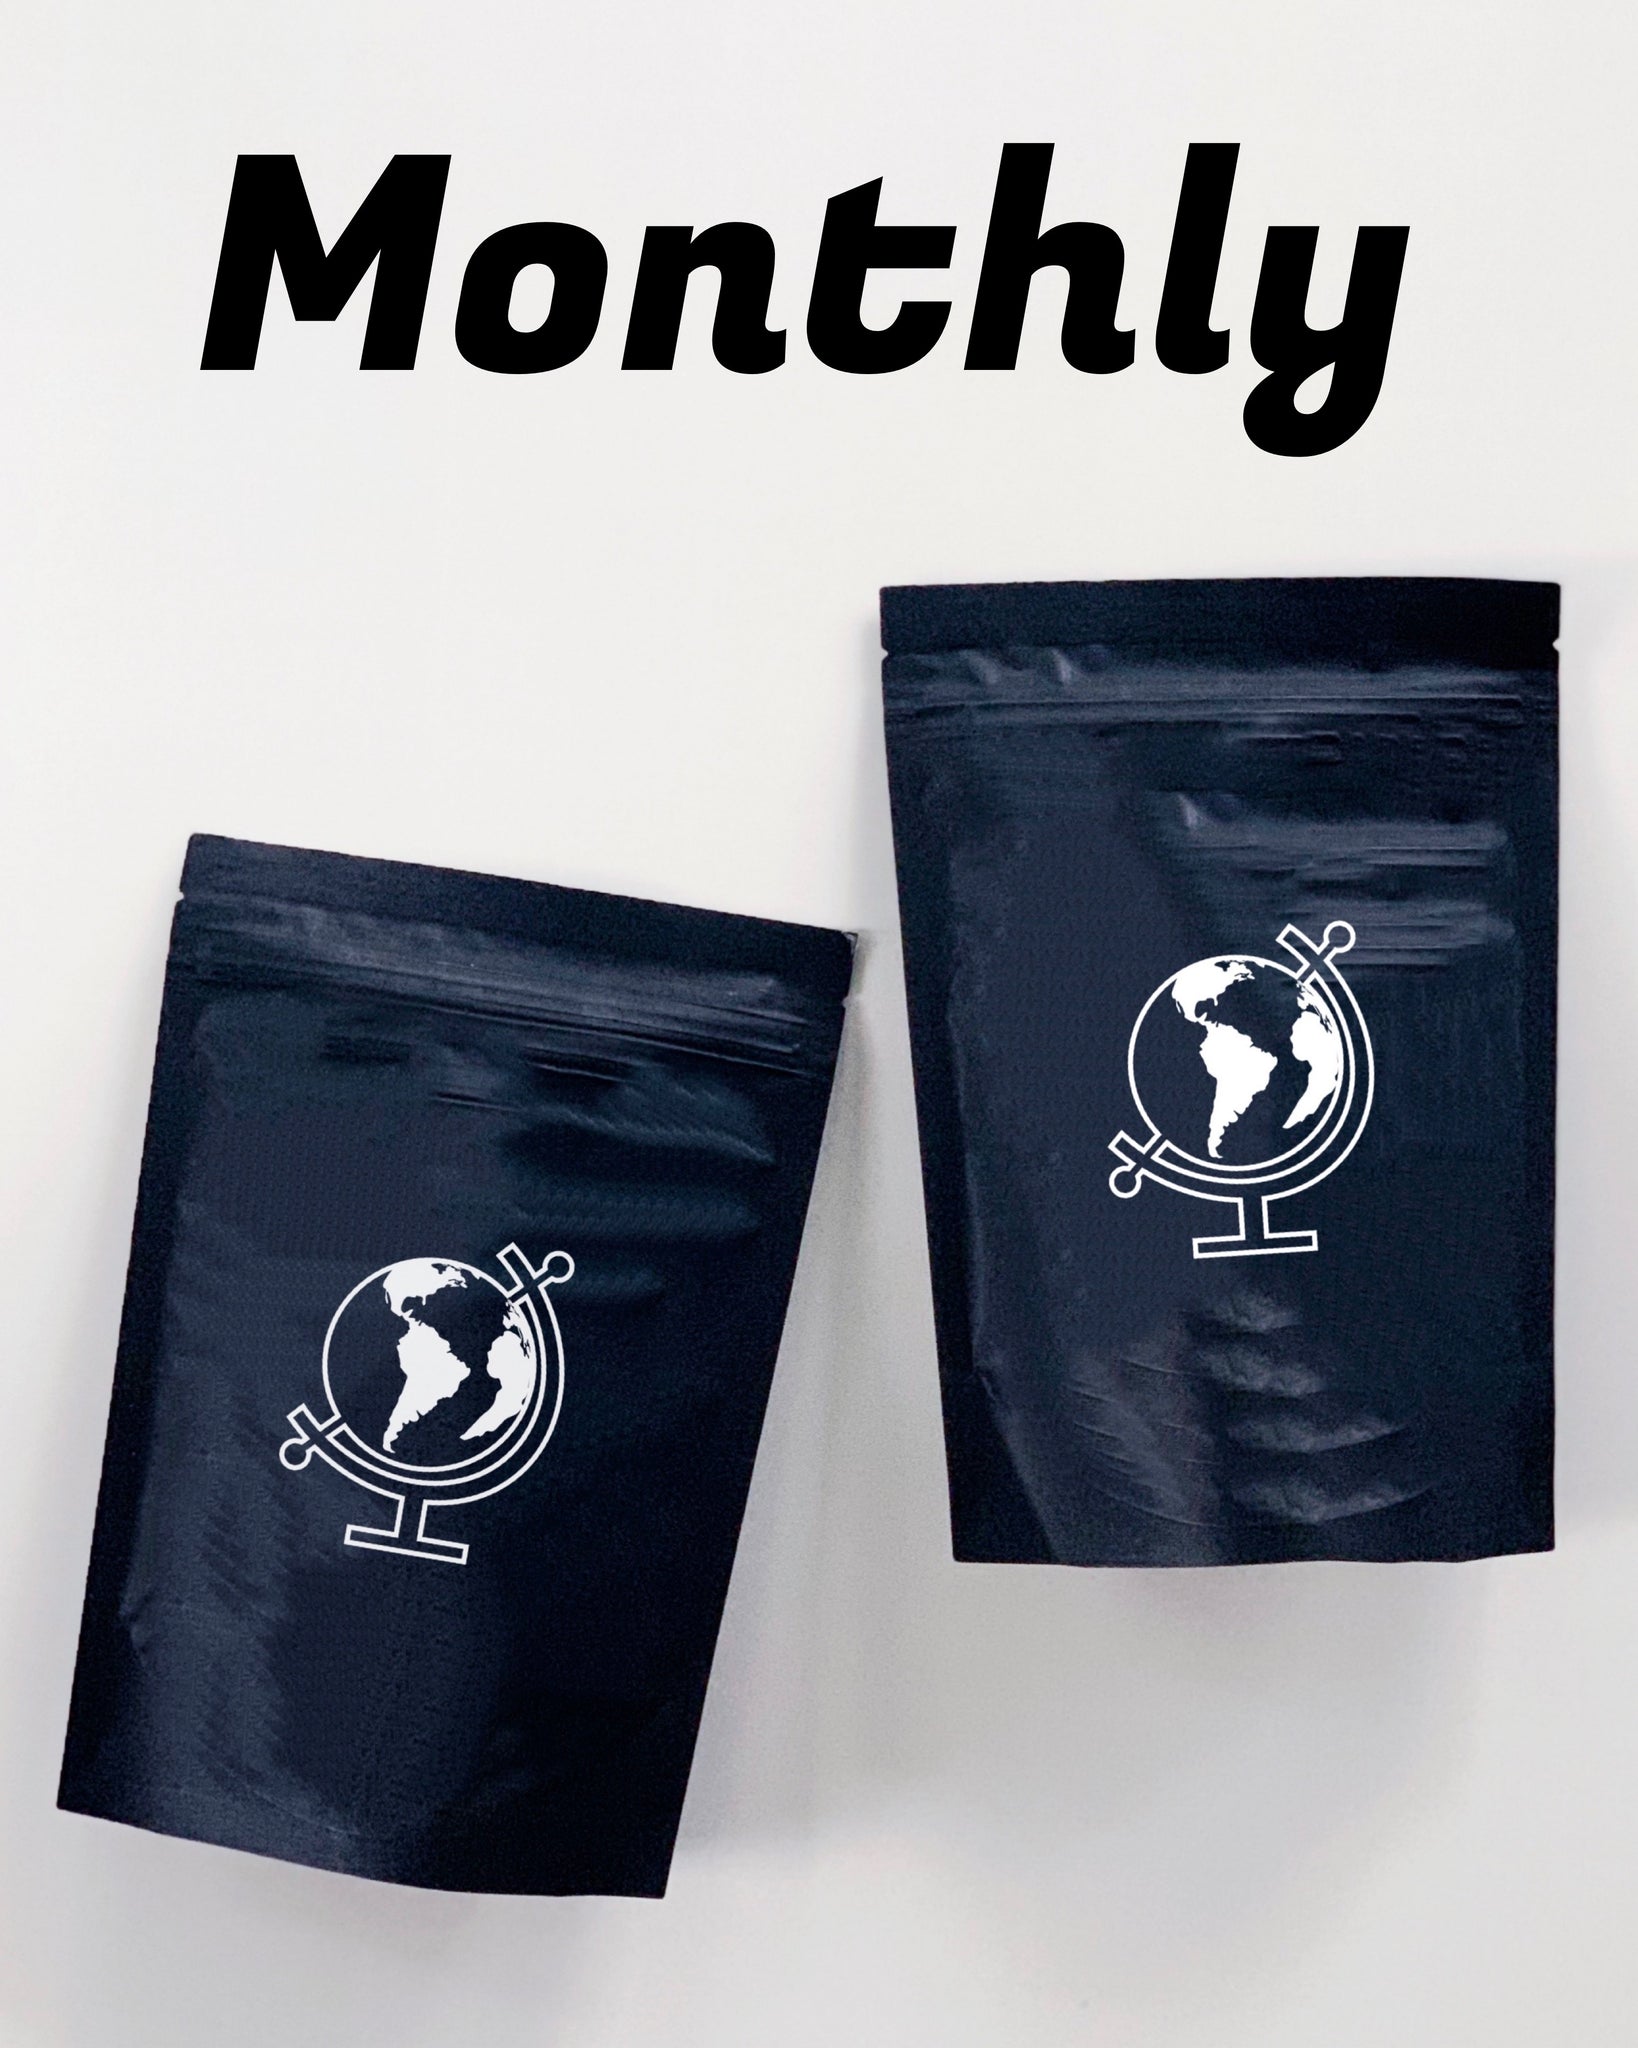 Monthly international coffee subscription.